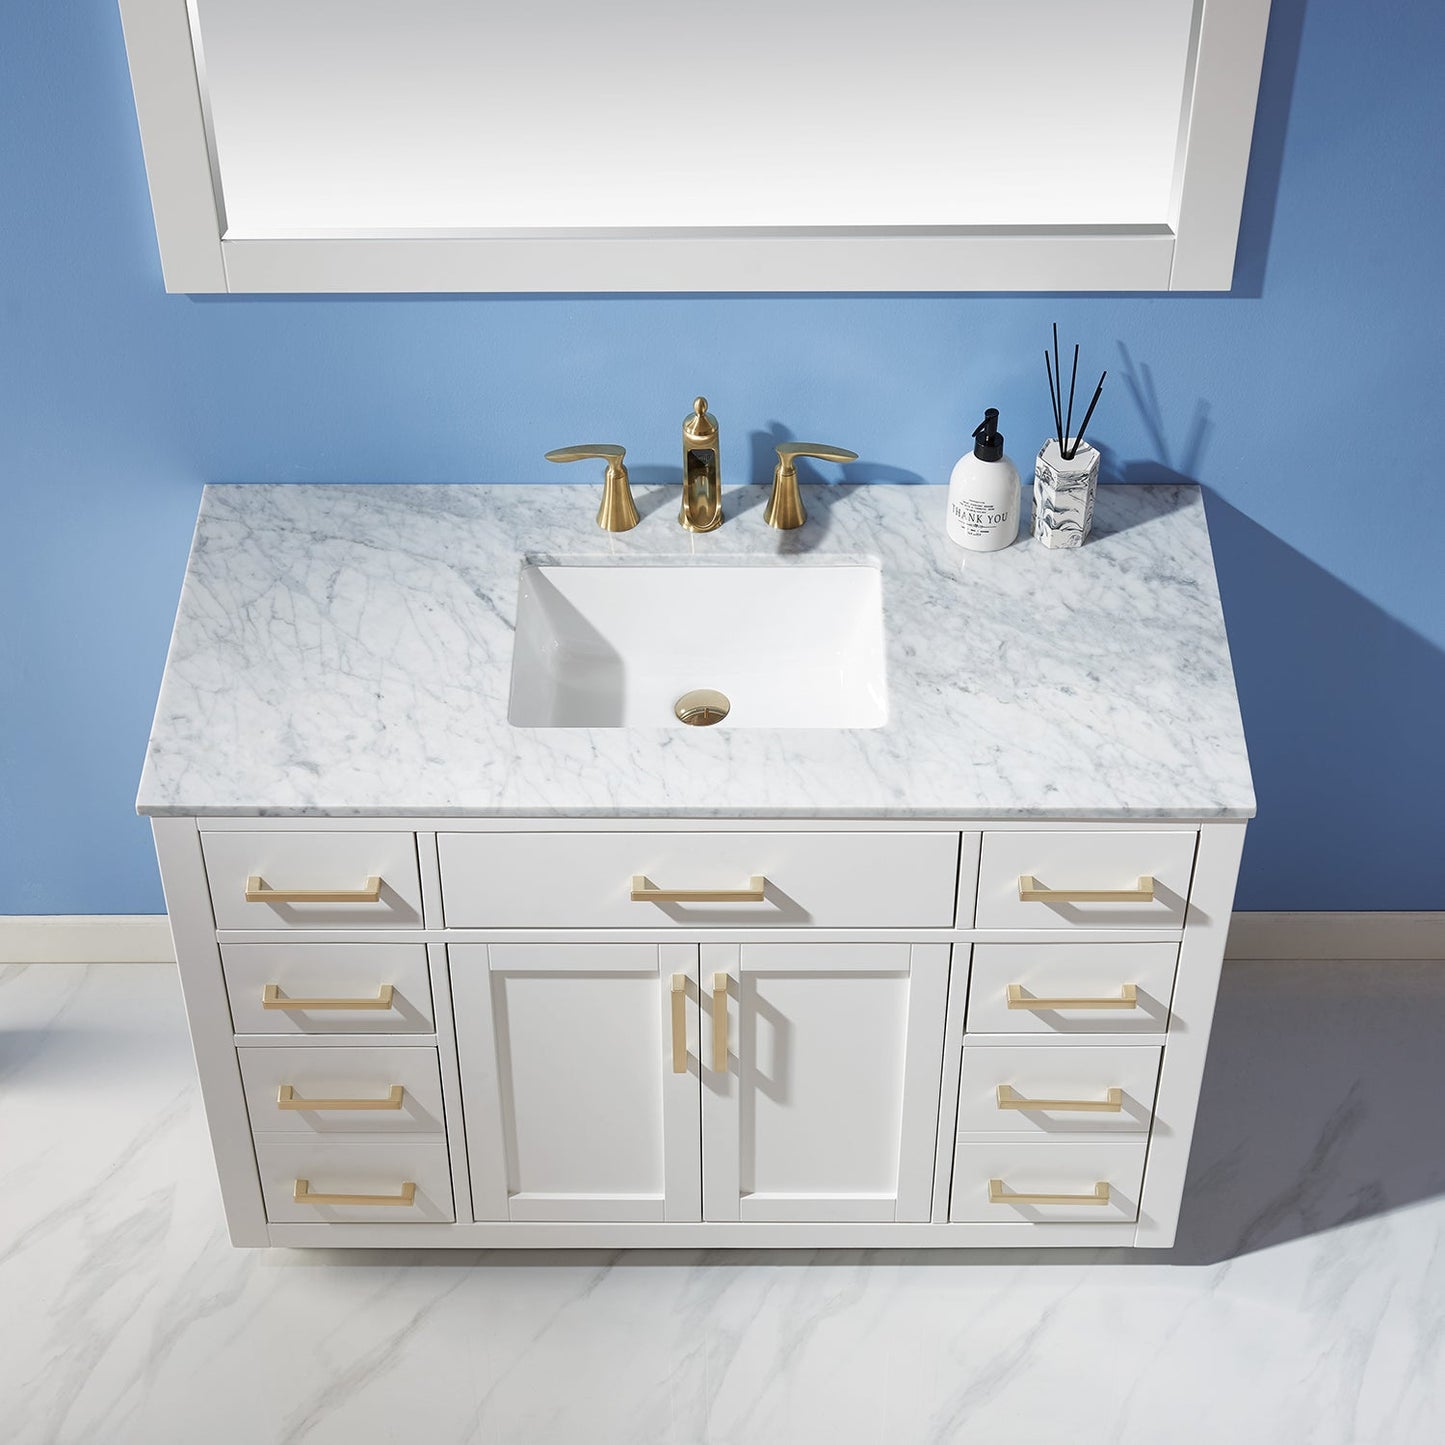 Ivy 48" Single Bathroom Vanity Set in White and Carrara White Marble Countertop with Mirror